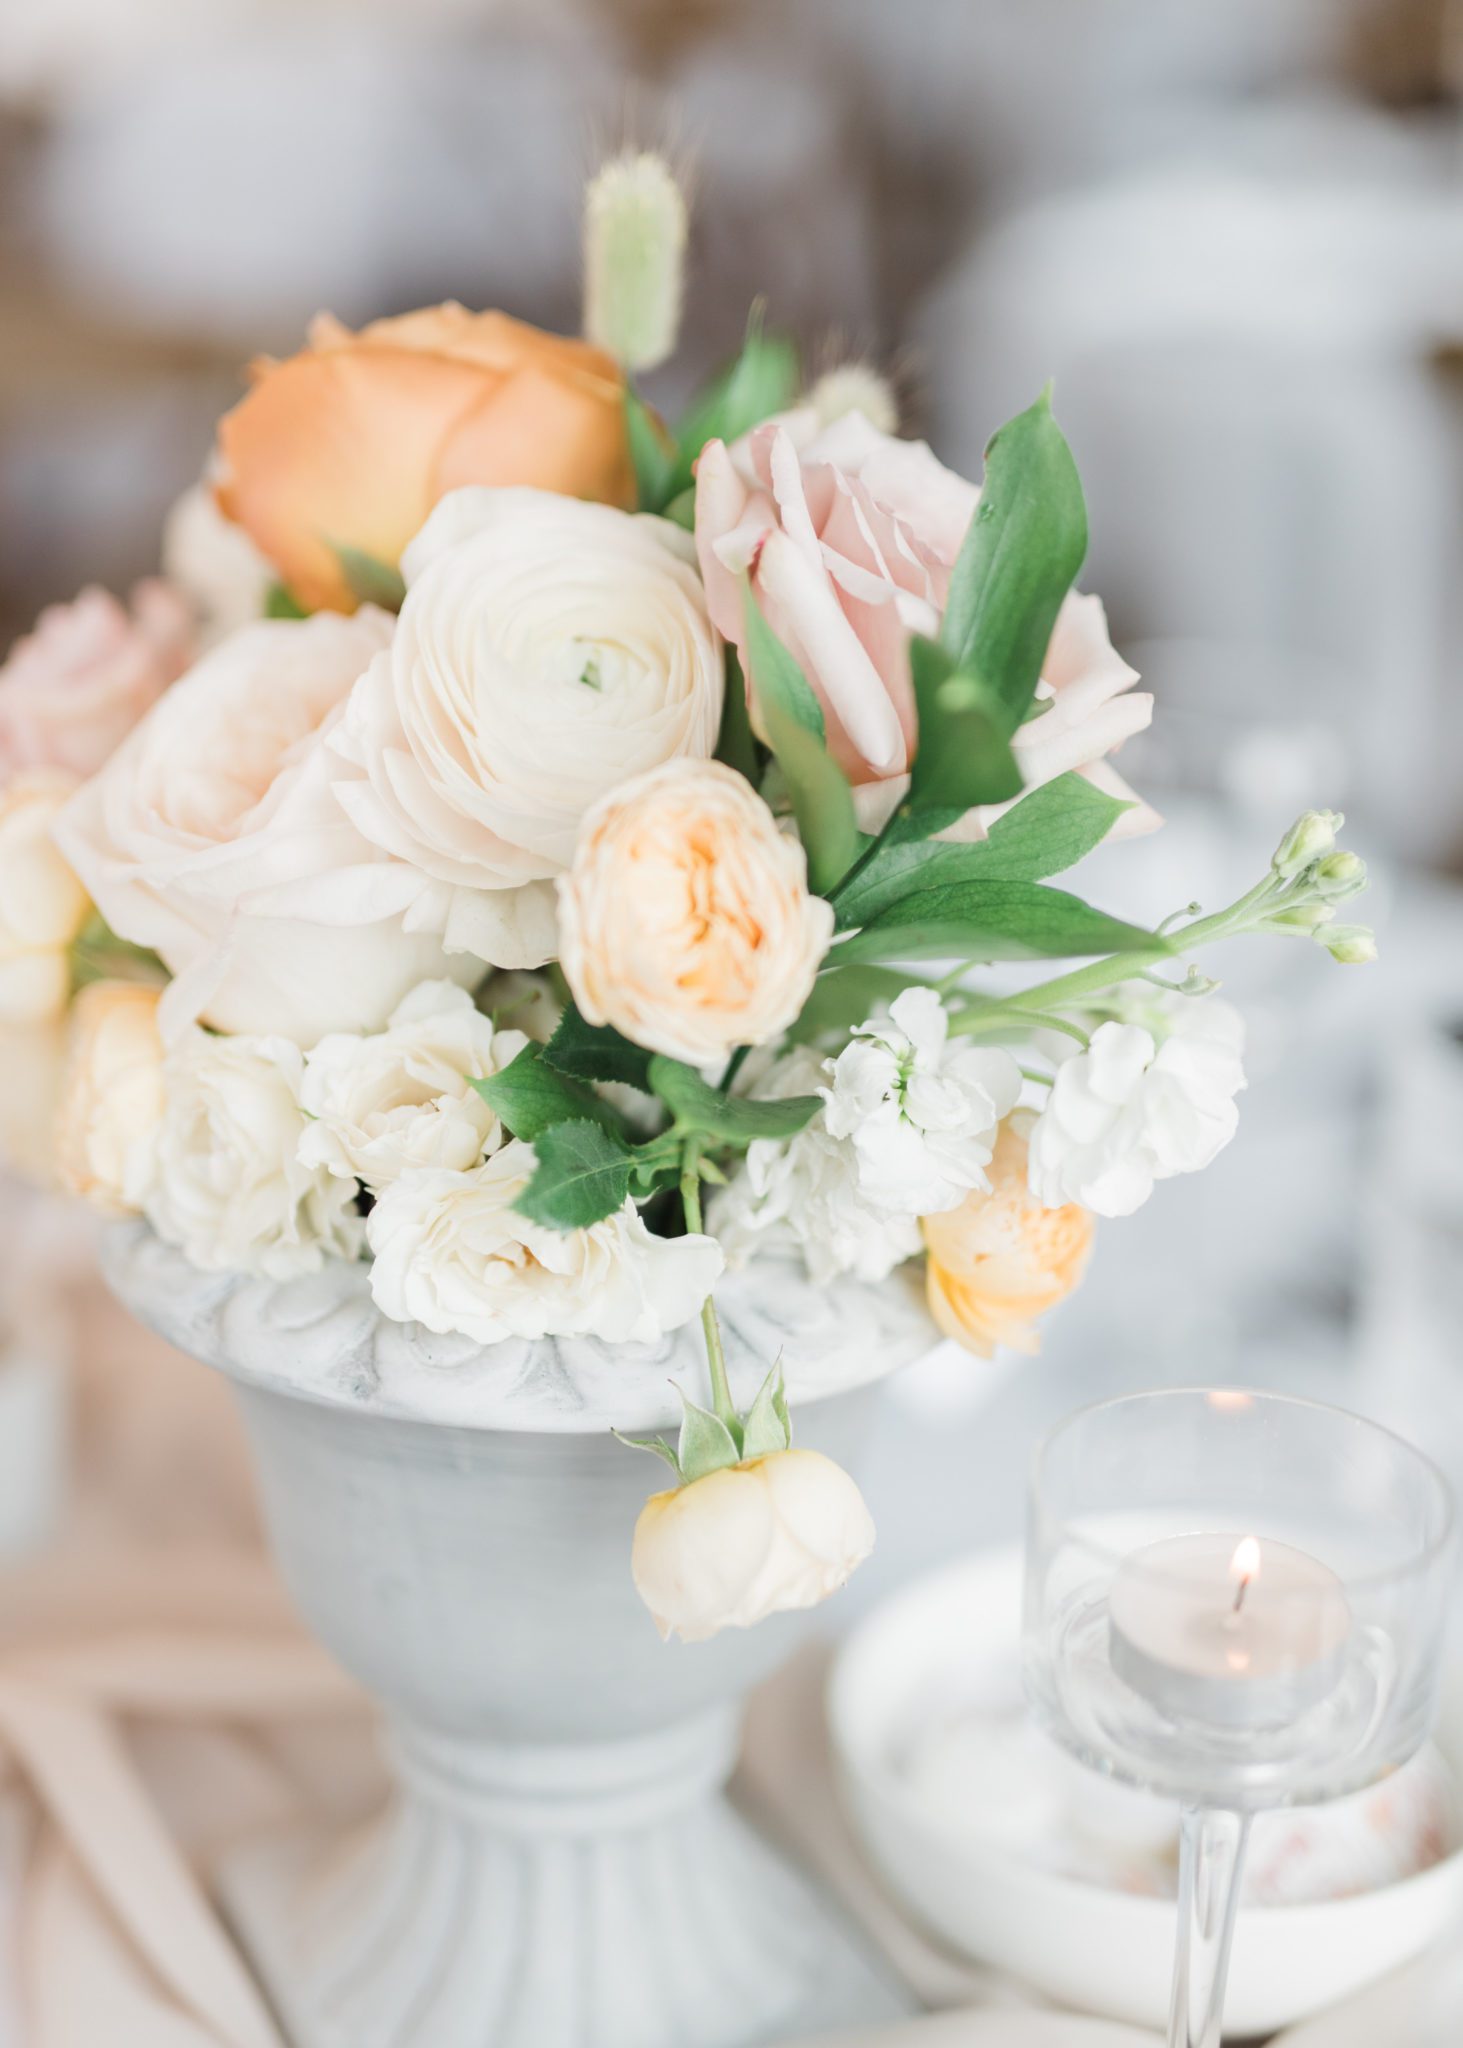 Cream, peach and white wedding floral arrangements for your reception